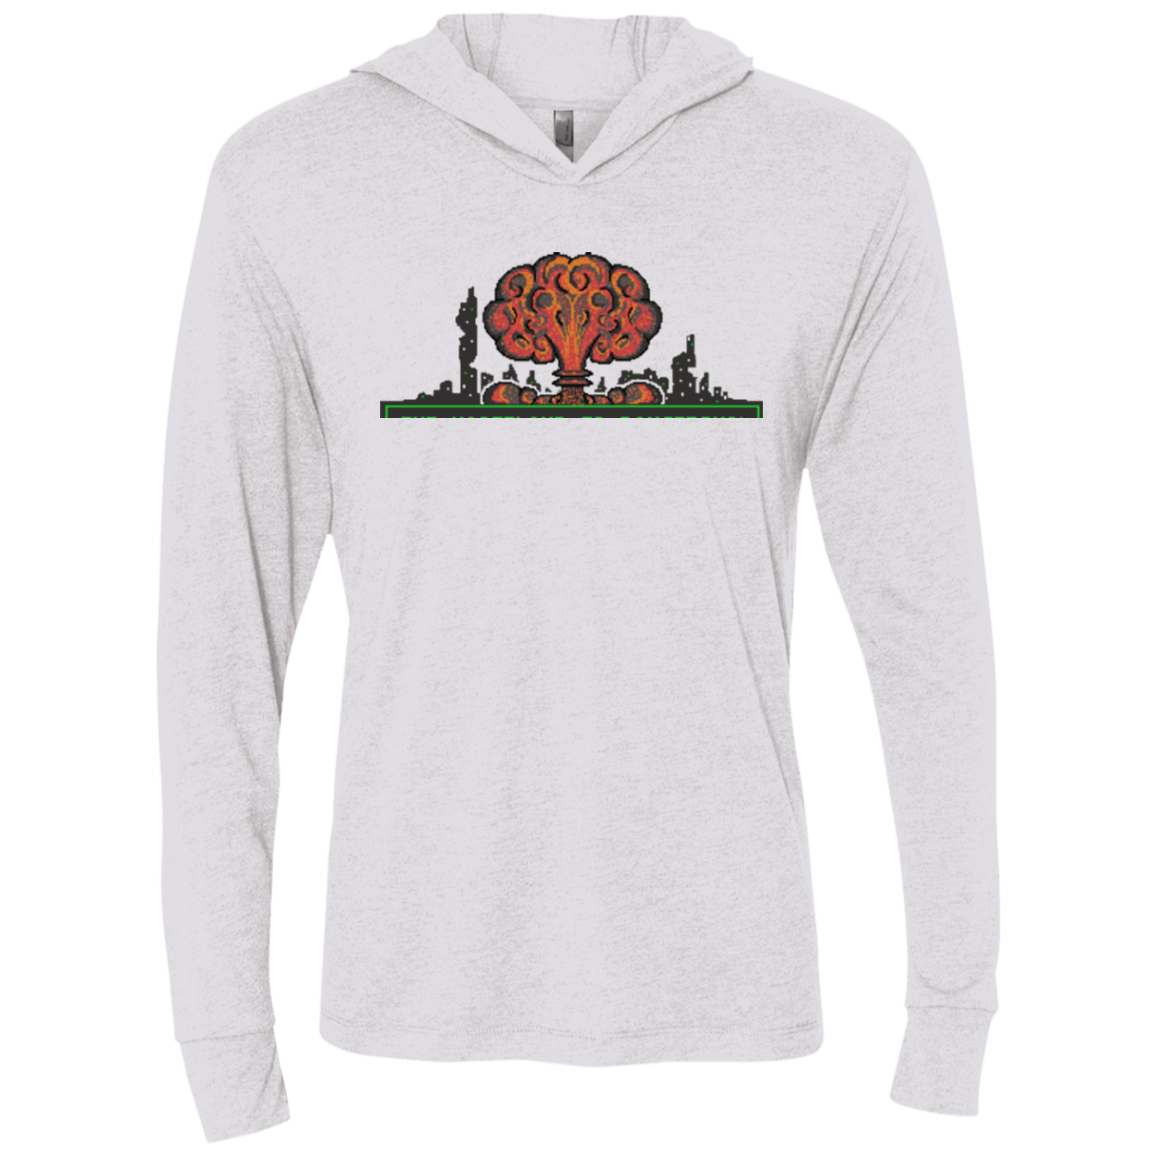 T-Shirts Heather White / X-Small The Wasteland is Dangerous Triblend Long Sleeve Hoodie Tee